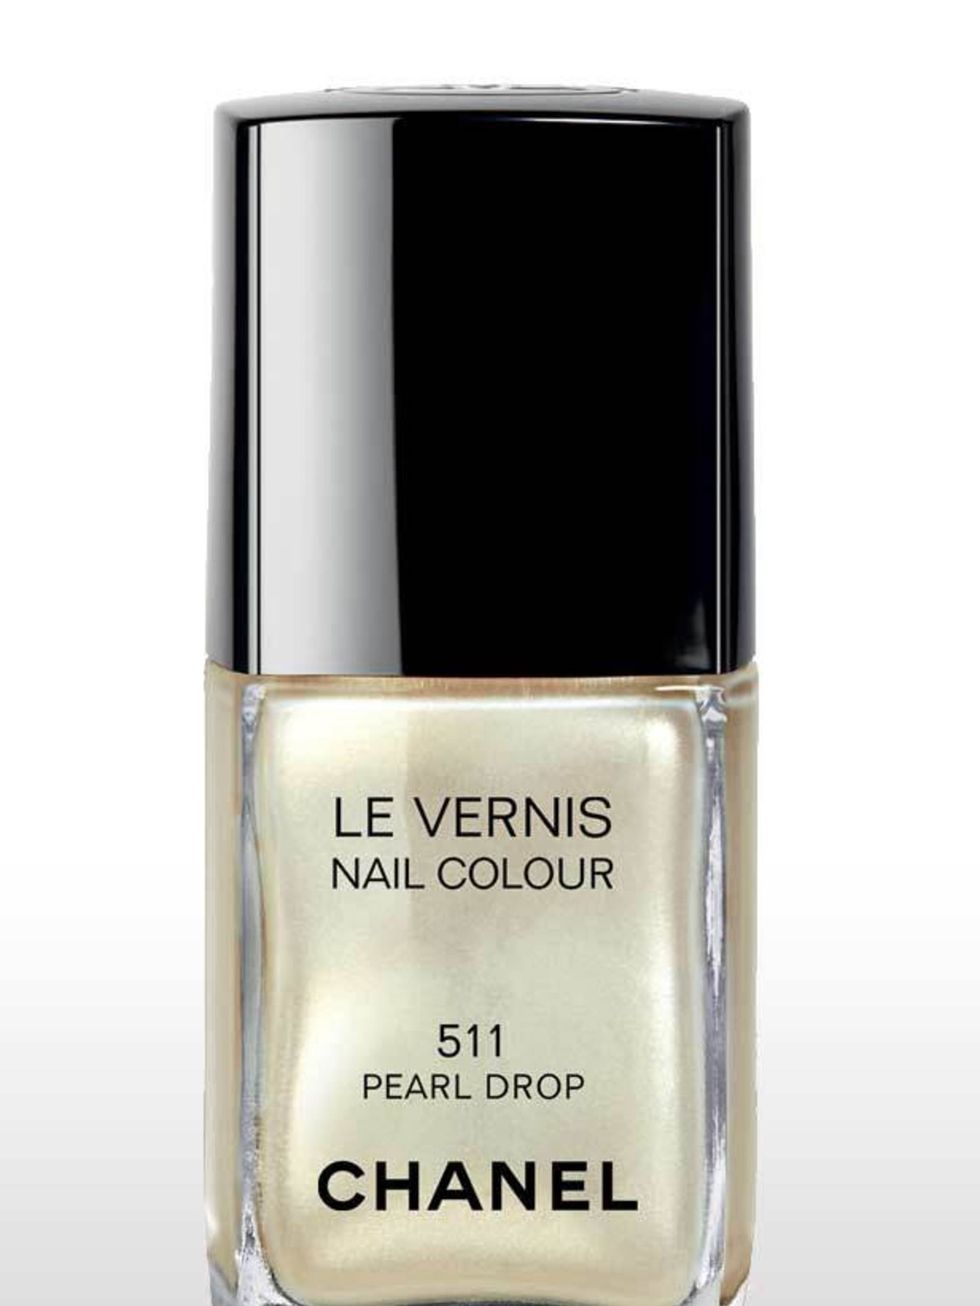 <p>Chanel Le Vernis in Pearl Drop, £16.85 at <a href="http://www.boots.com/webapp/wcs/stores/servlet/ProductDisplay?brand=CHANEL&amp;storeId=10052&amp;productID=MANPR010">Boots</a></p>